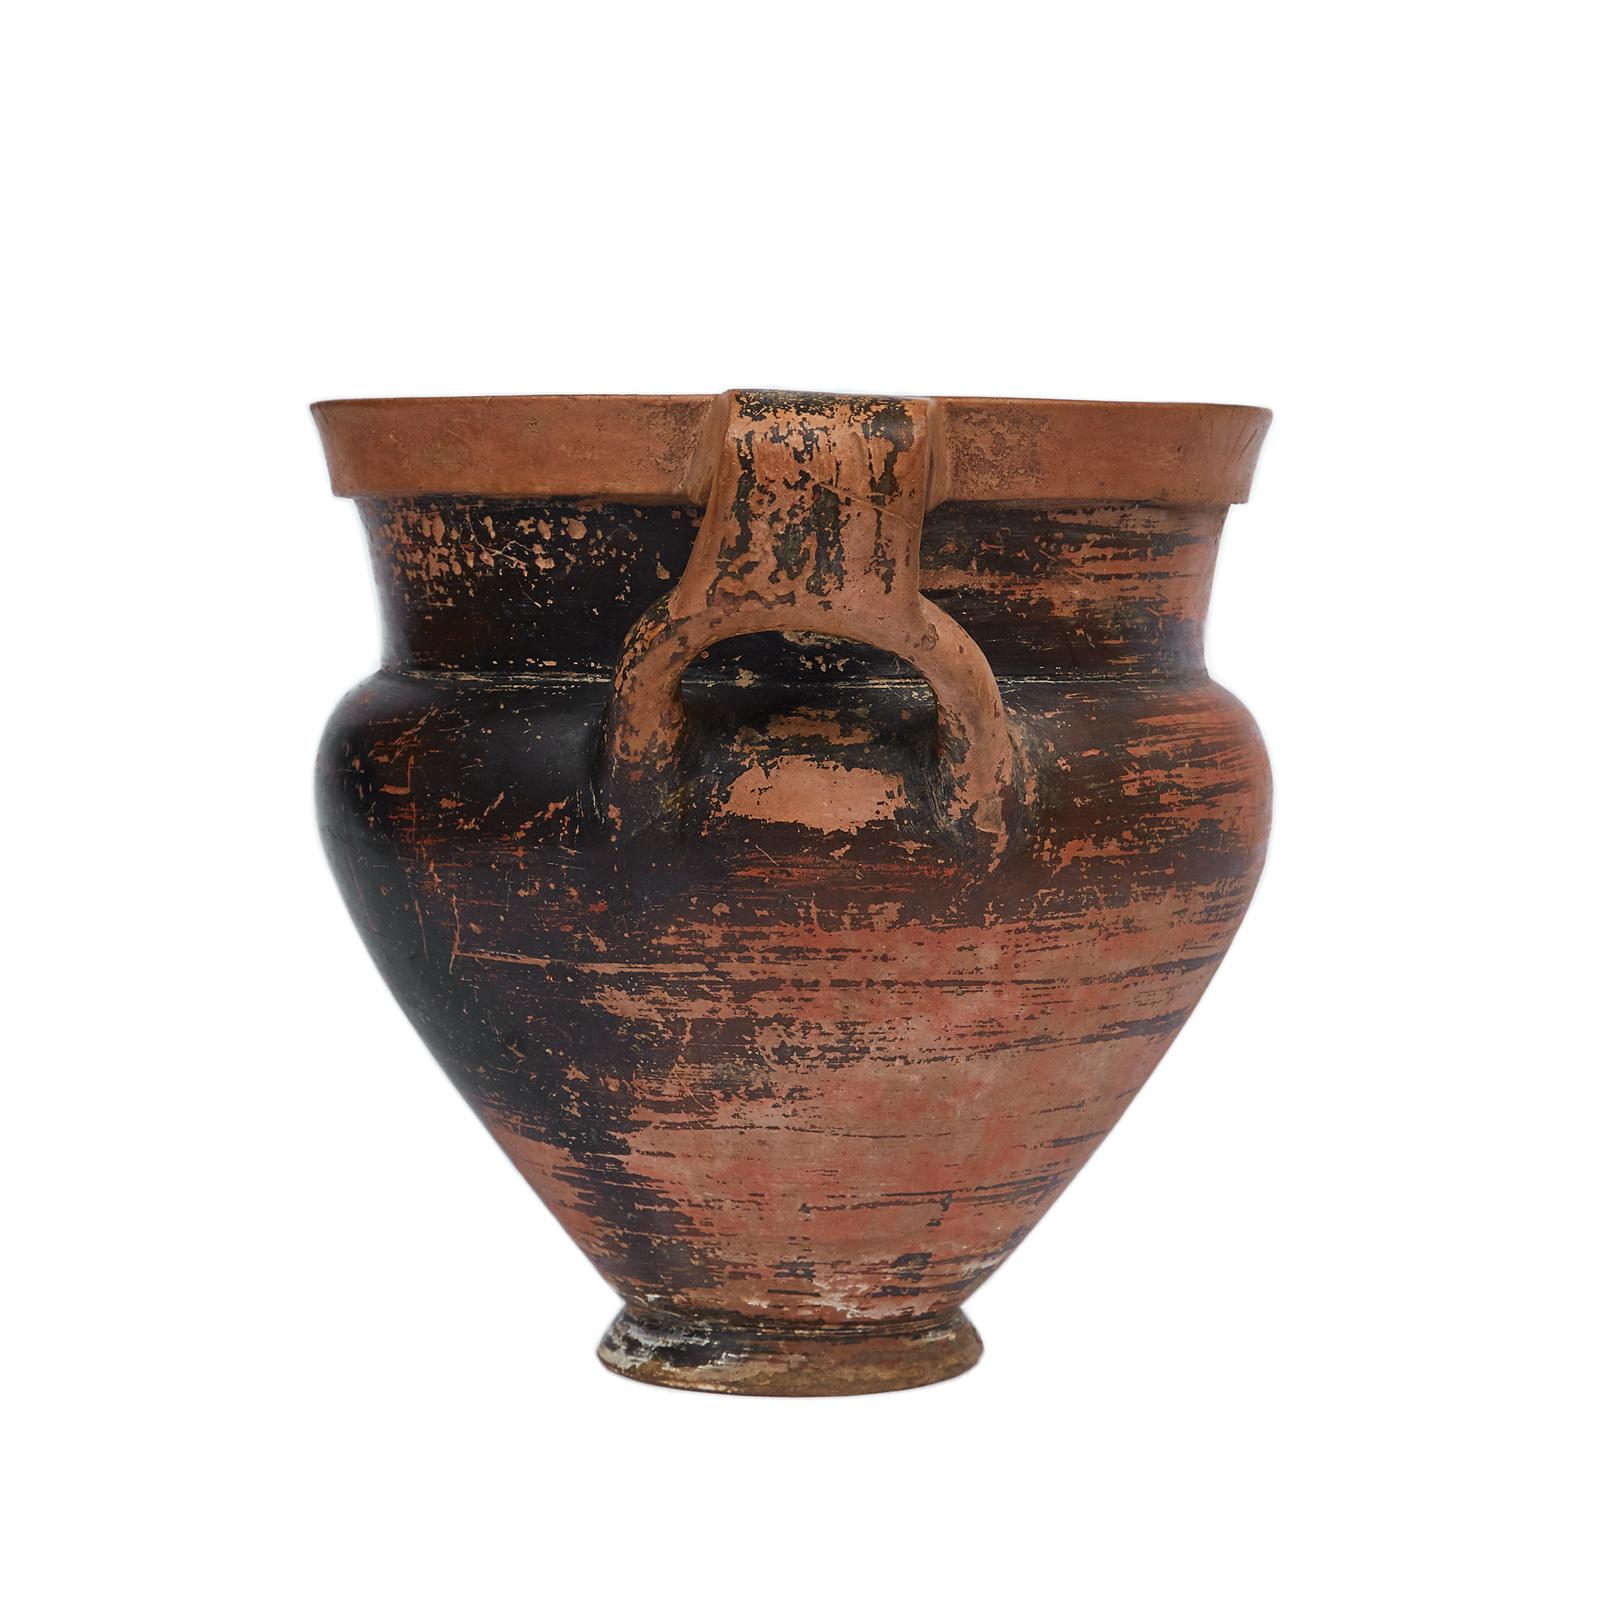 Black Glazen column krater,
mid-4th century BC, Apulia.

With broad avoid body on a short echinus foot and thick mouth.
The two handles form loops around the shoulders. 
Resembling the Laconian style this vase is extremely rare due to the integrity